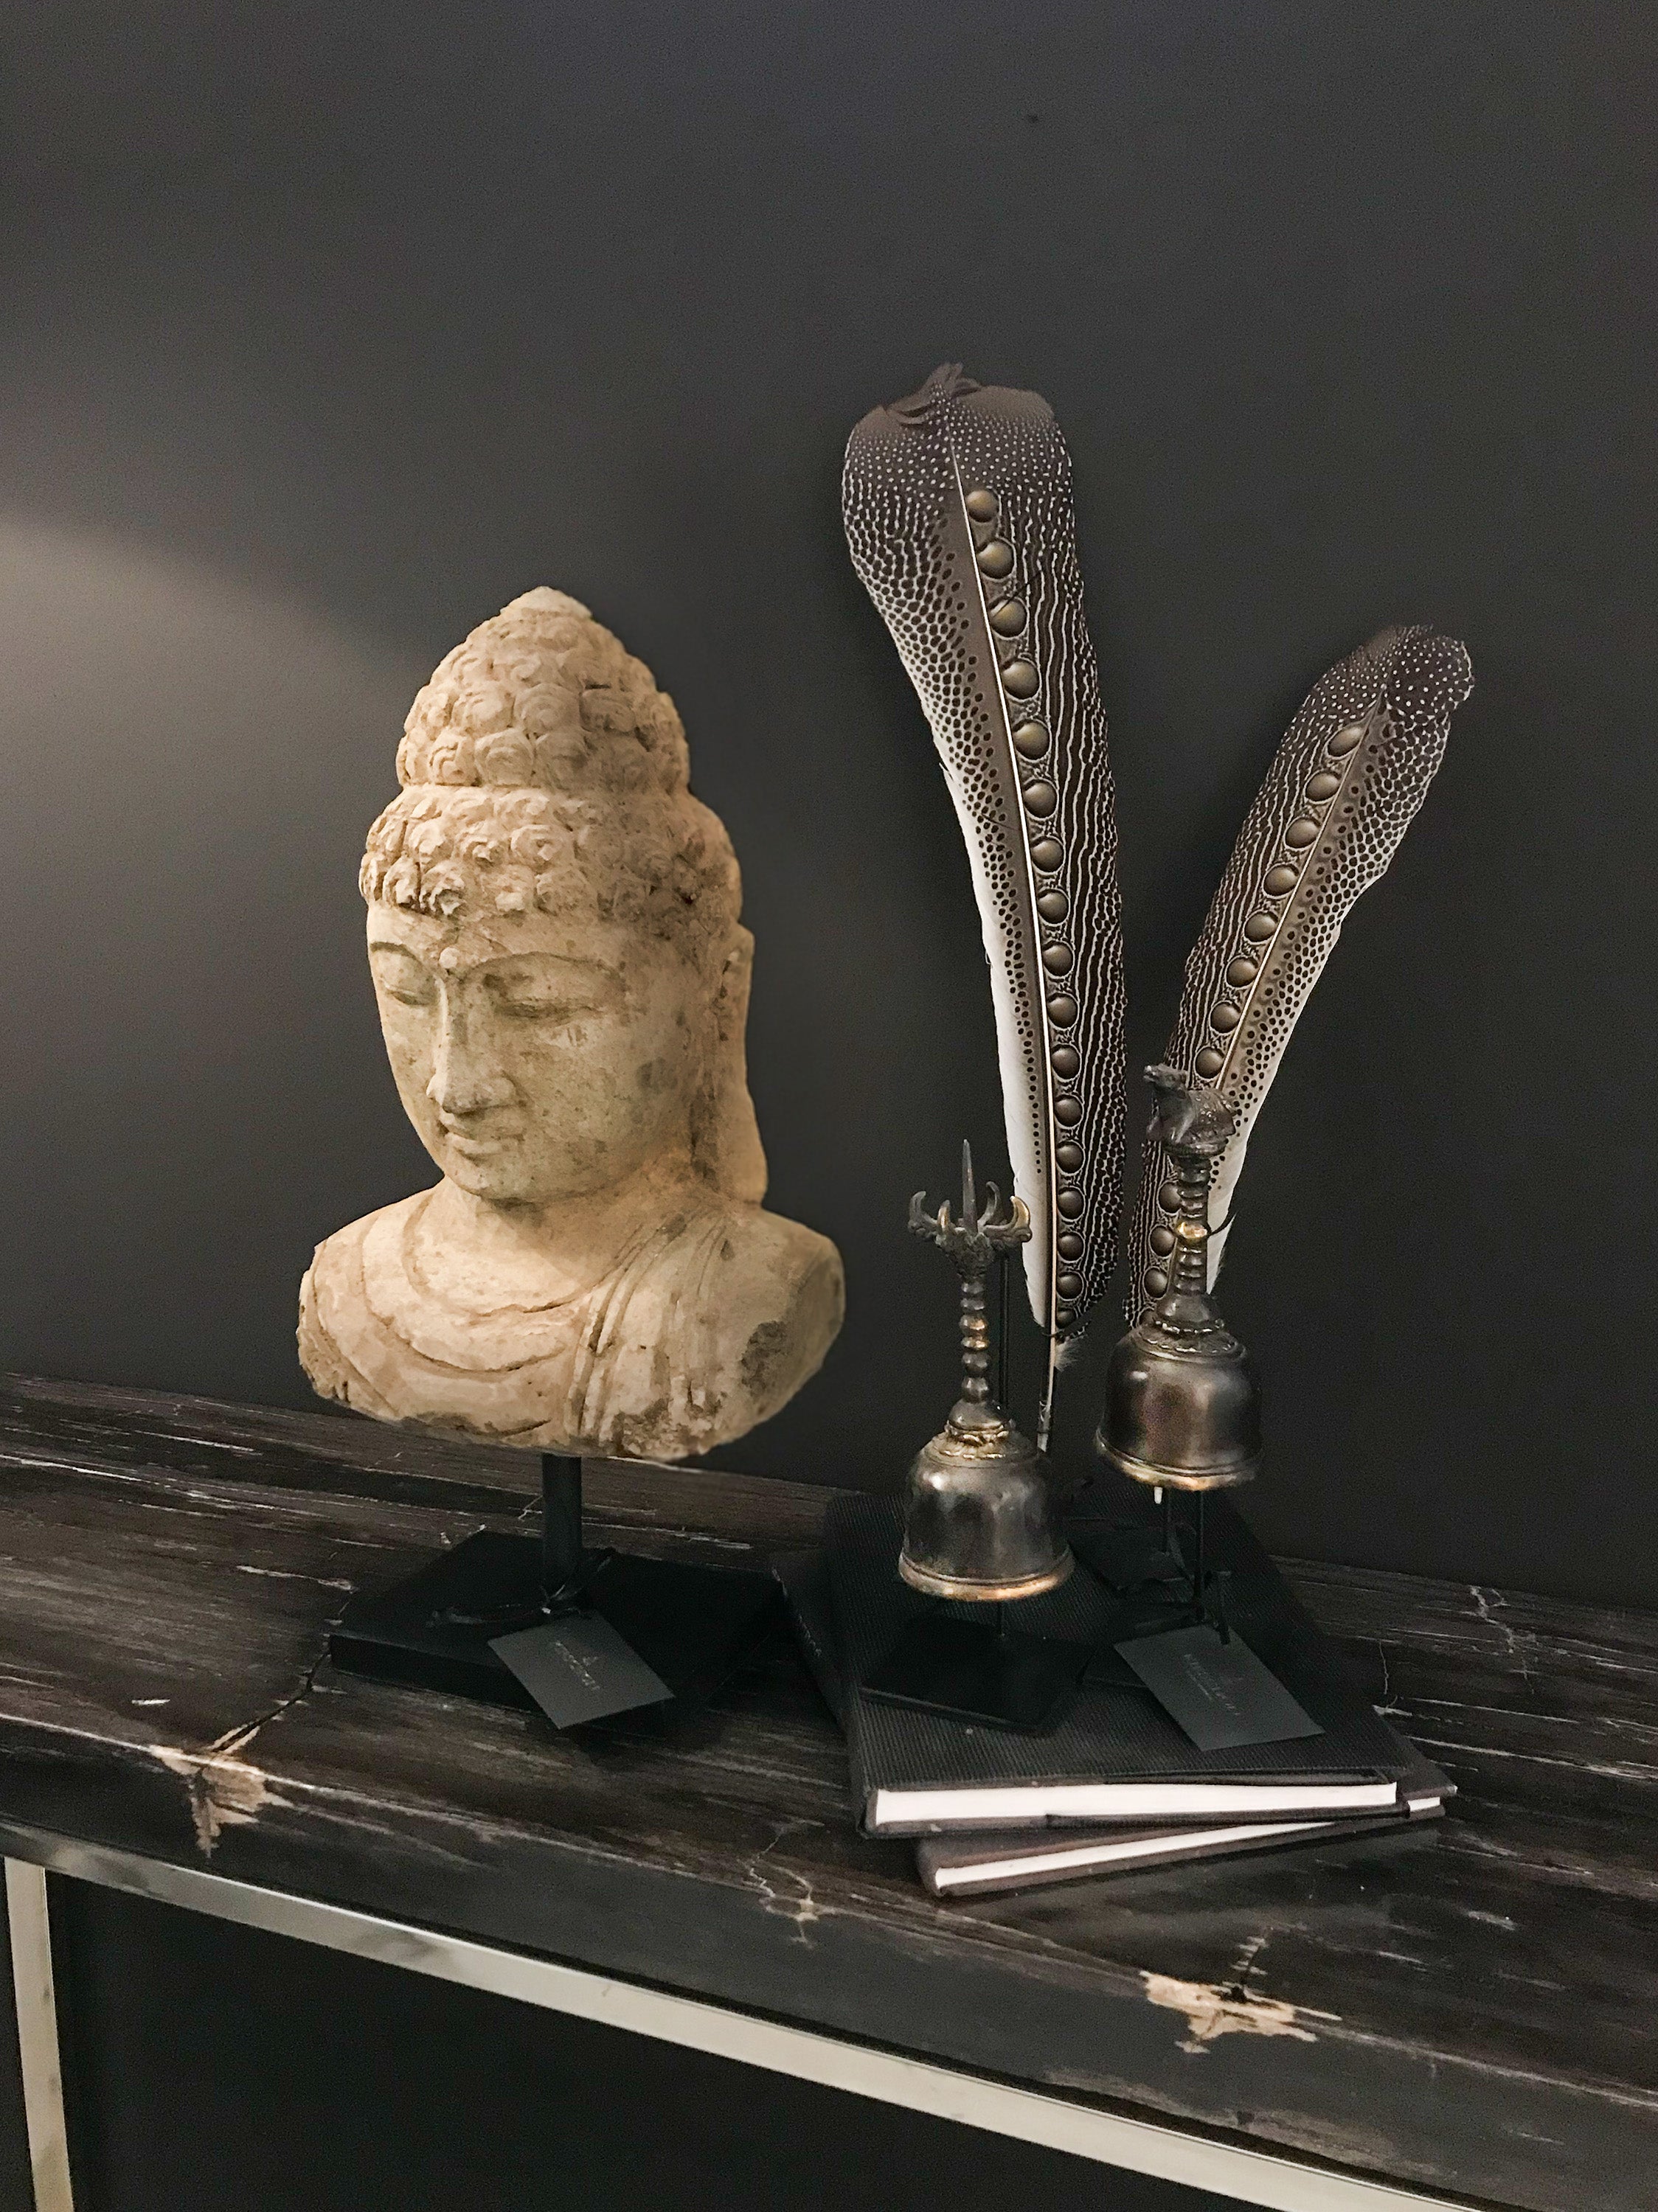 Asian Art from Kirschon, Buddha stone statue, peacock feathers and ghanta temple bells